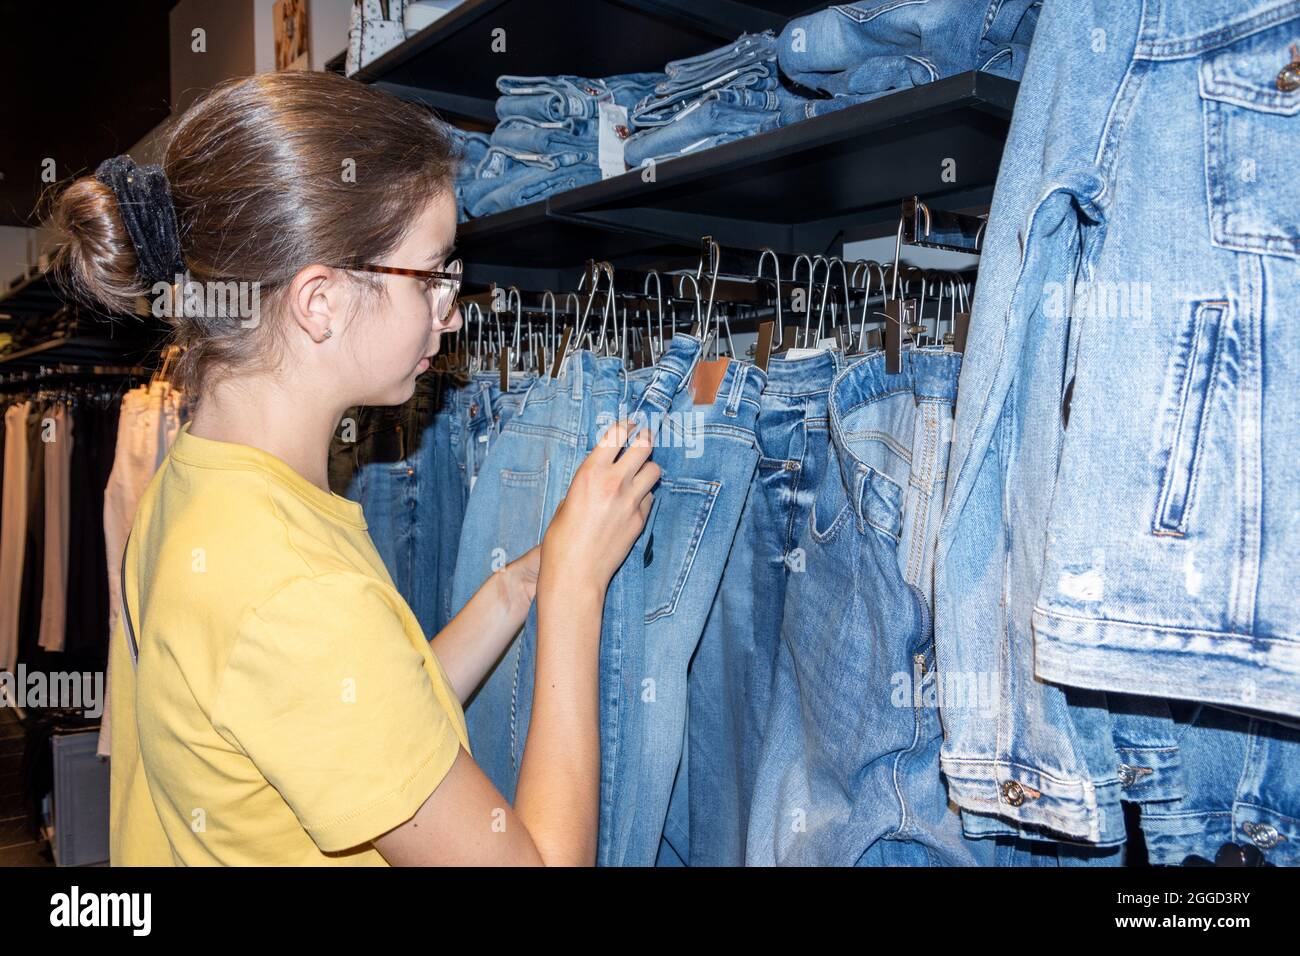 Girl choosing jeans jacket hanging on hangers in a boutique. Reasonable consumption concept. Sale of clothes in stores and online concept. Seasonal sa Stock Photo